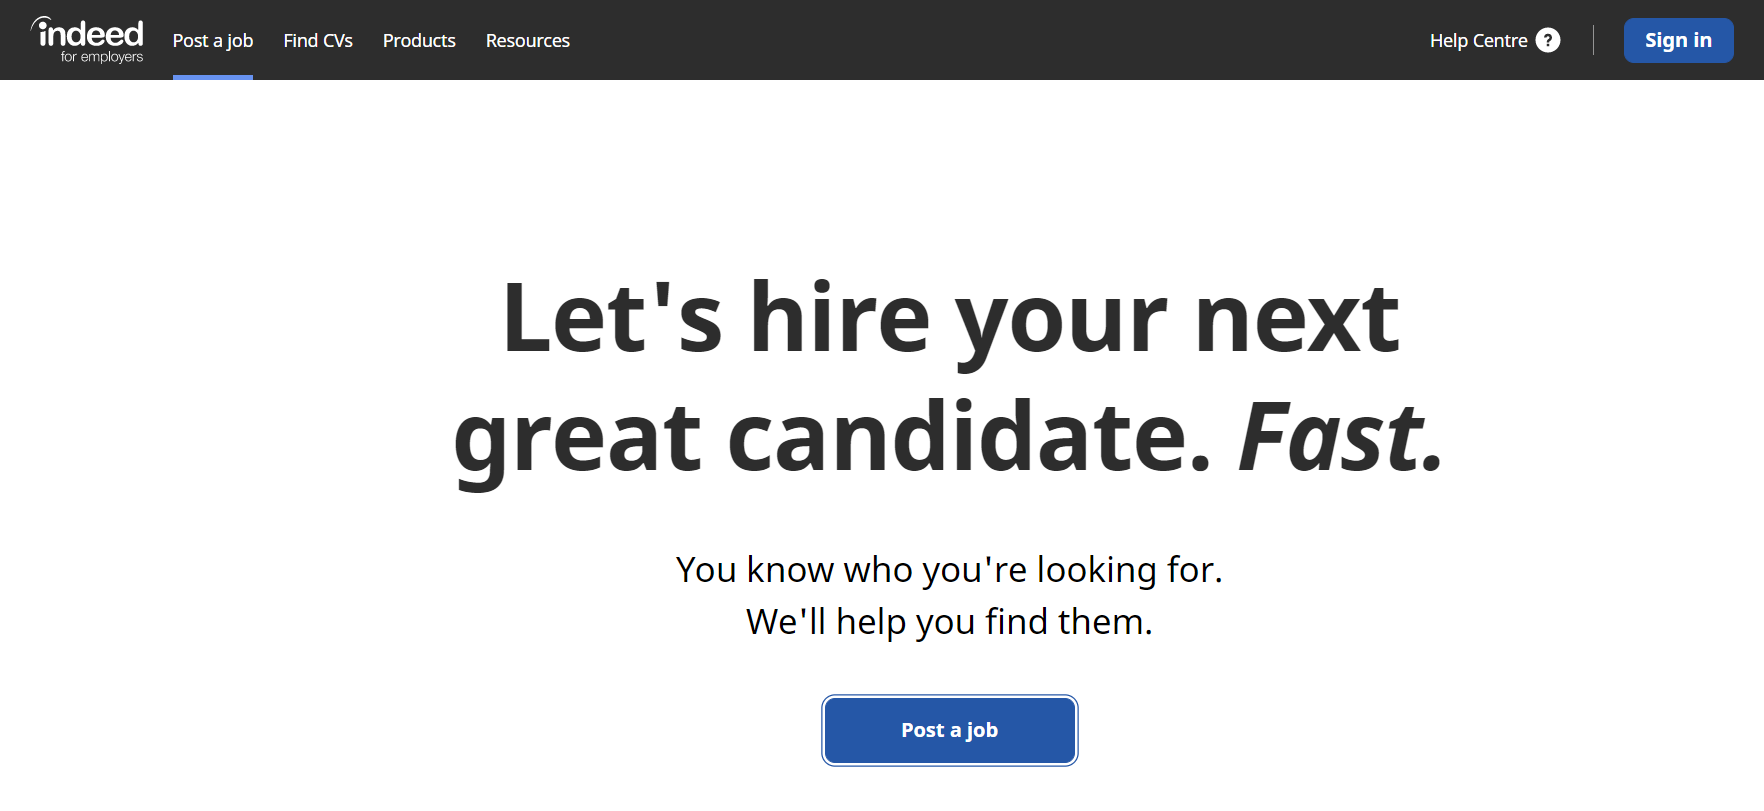 Interface for indeed job board for employers where you can upload a job listing for free